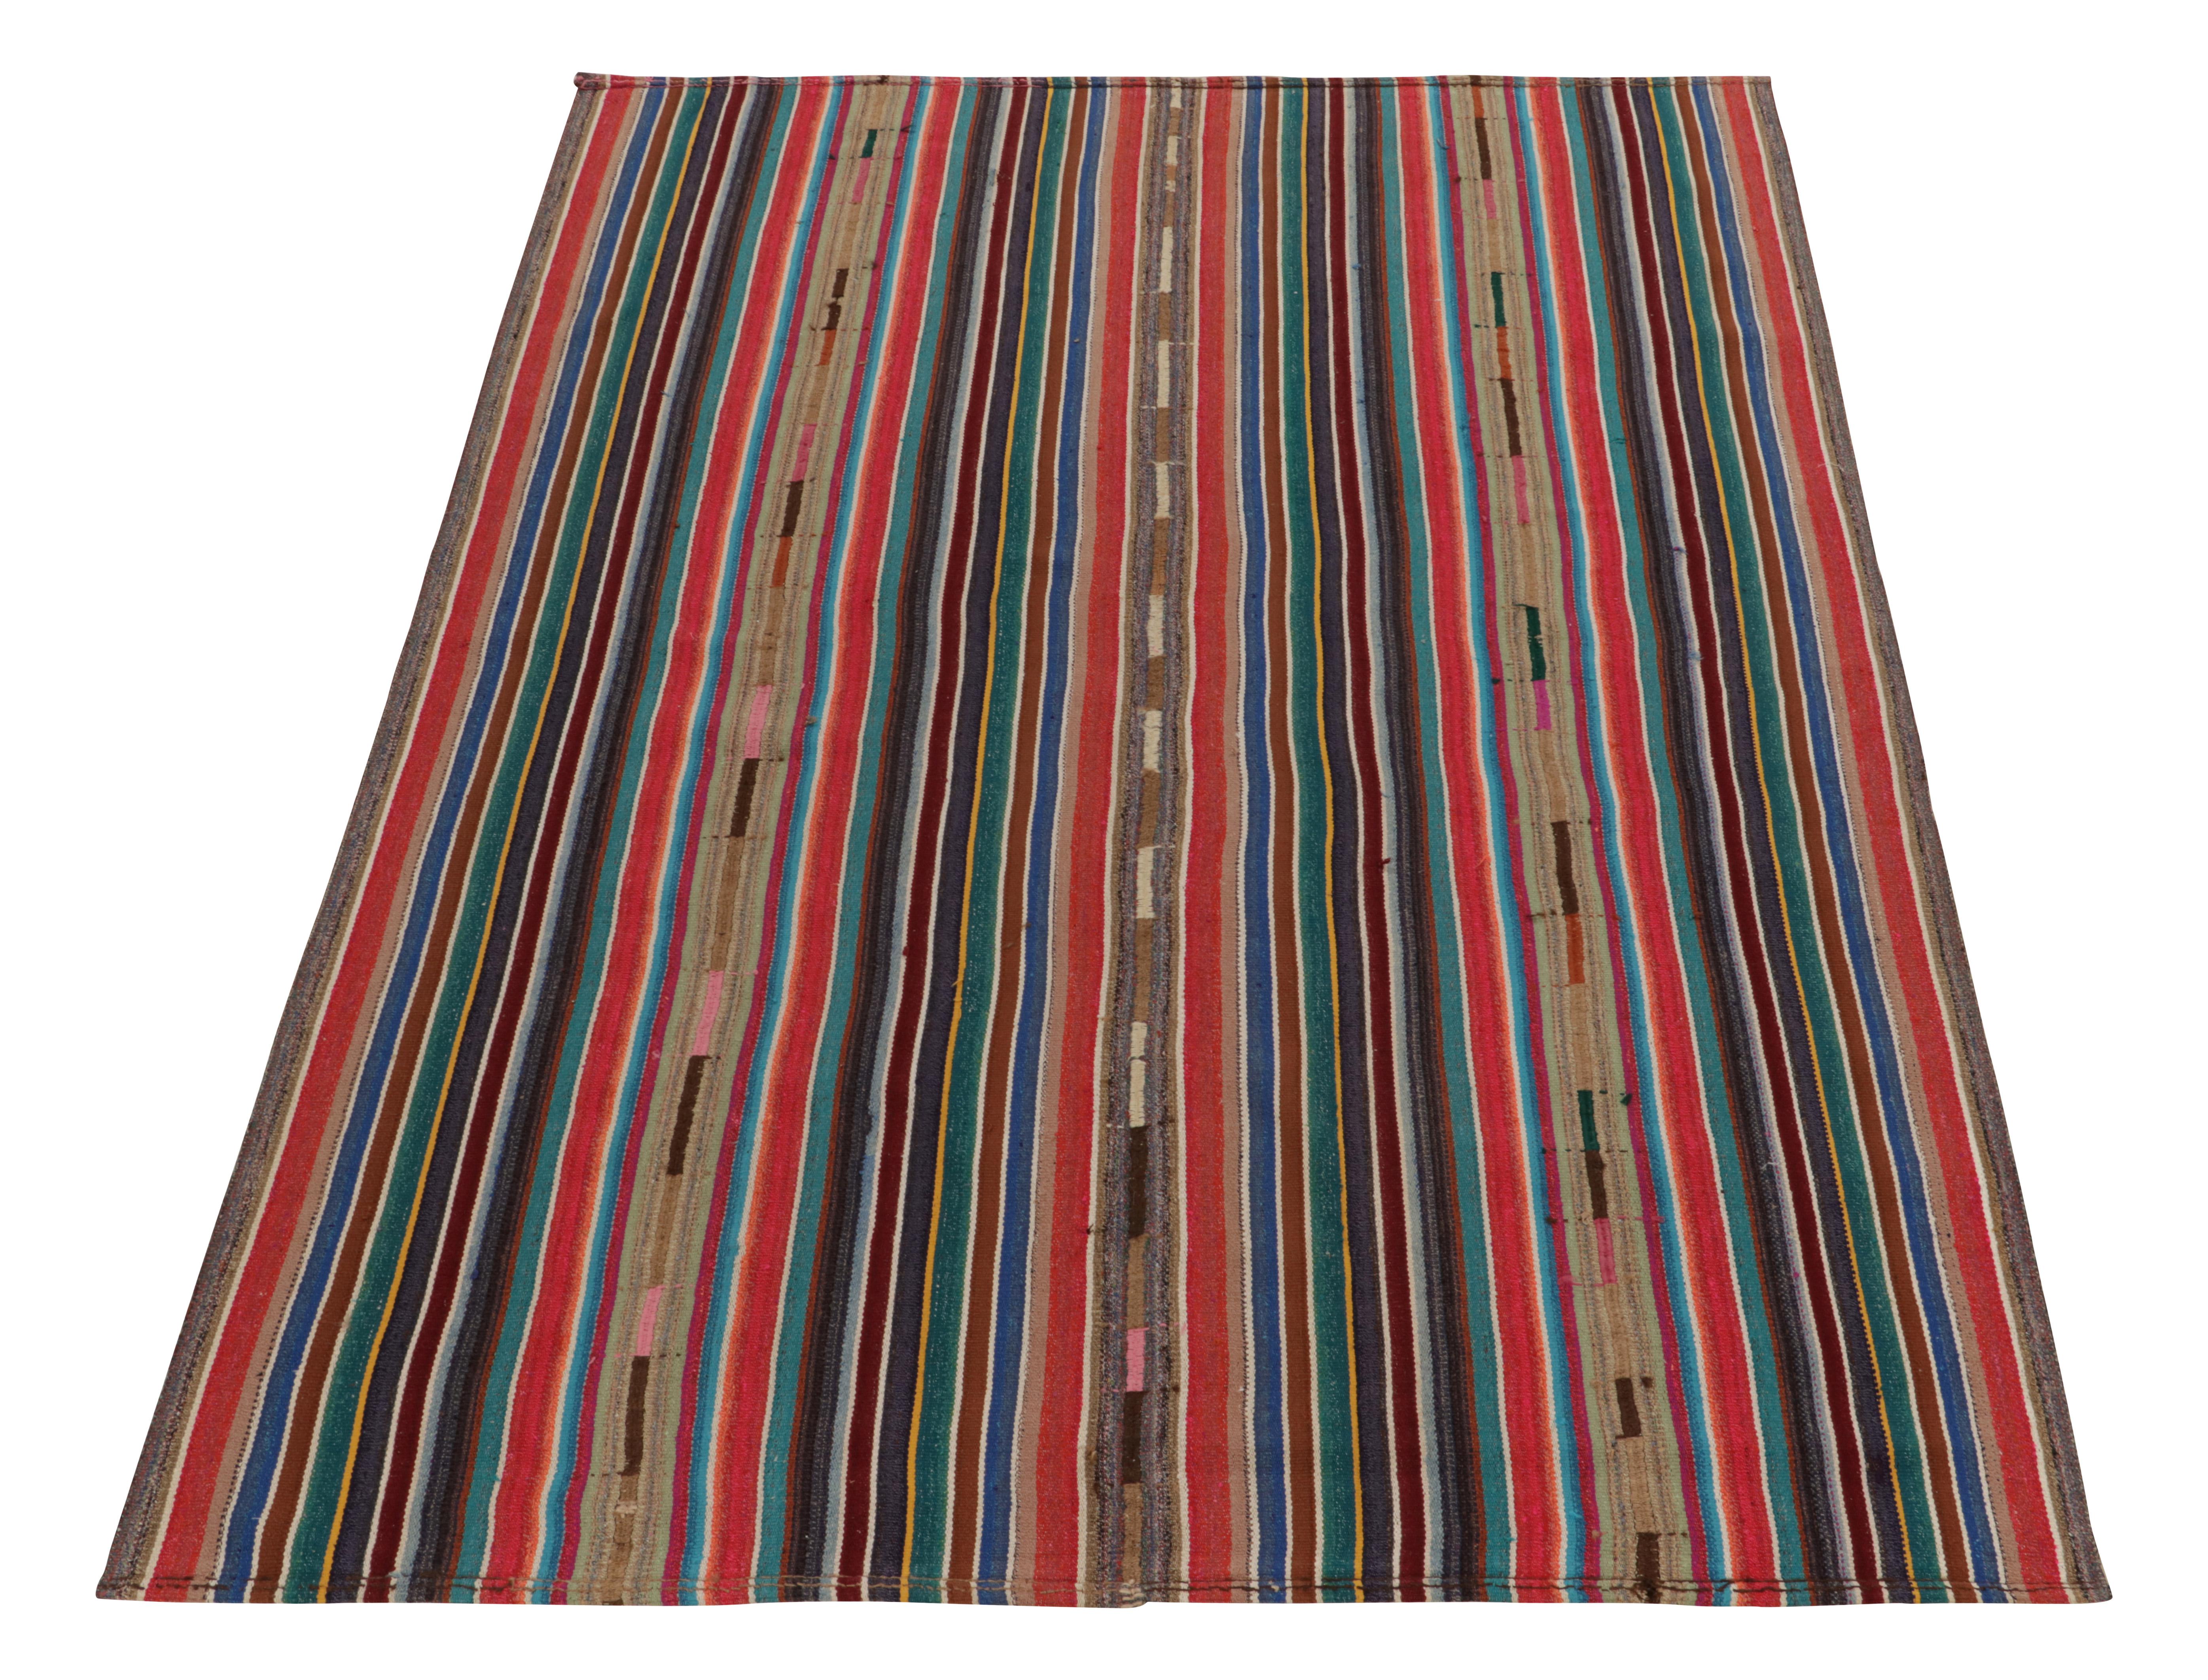 Hailing from Turkey circa 1950-1960, a vintage chaput kilim rug from a rare new curation joining our flat weaves. Characterized by fine detailing with the colors within the polychromatic stripes, the lively piece welcomes a departure from